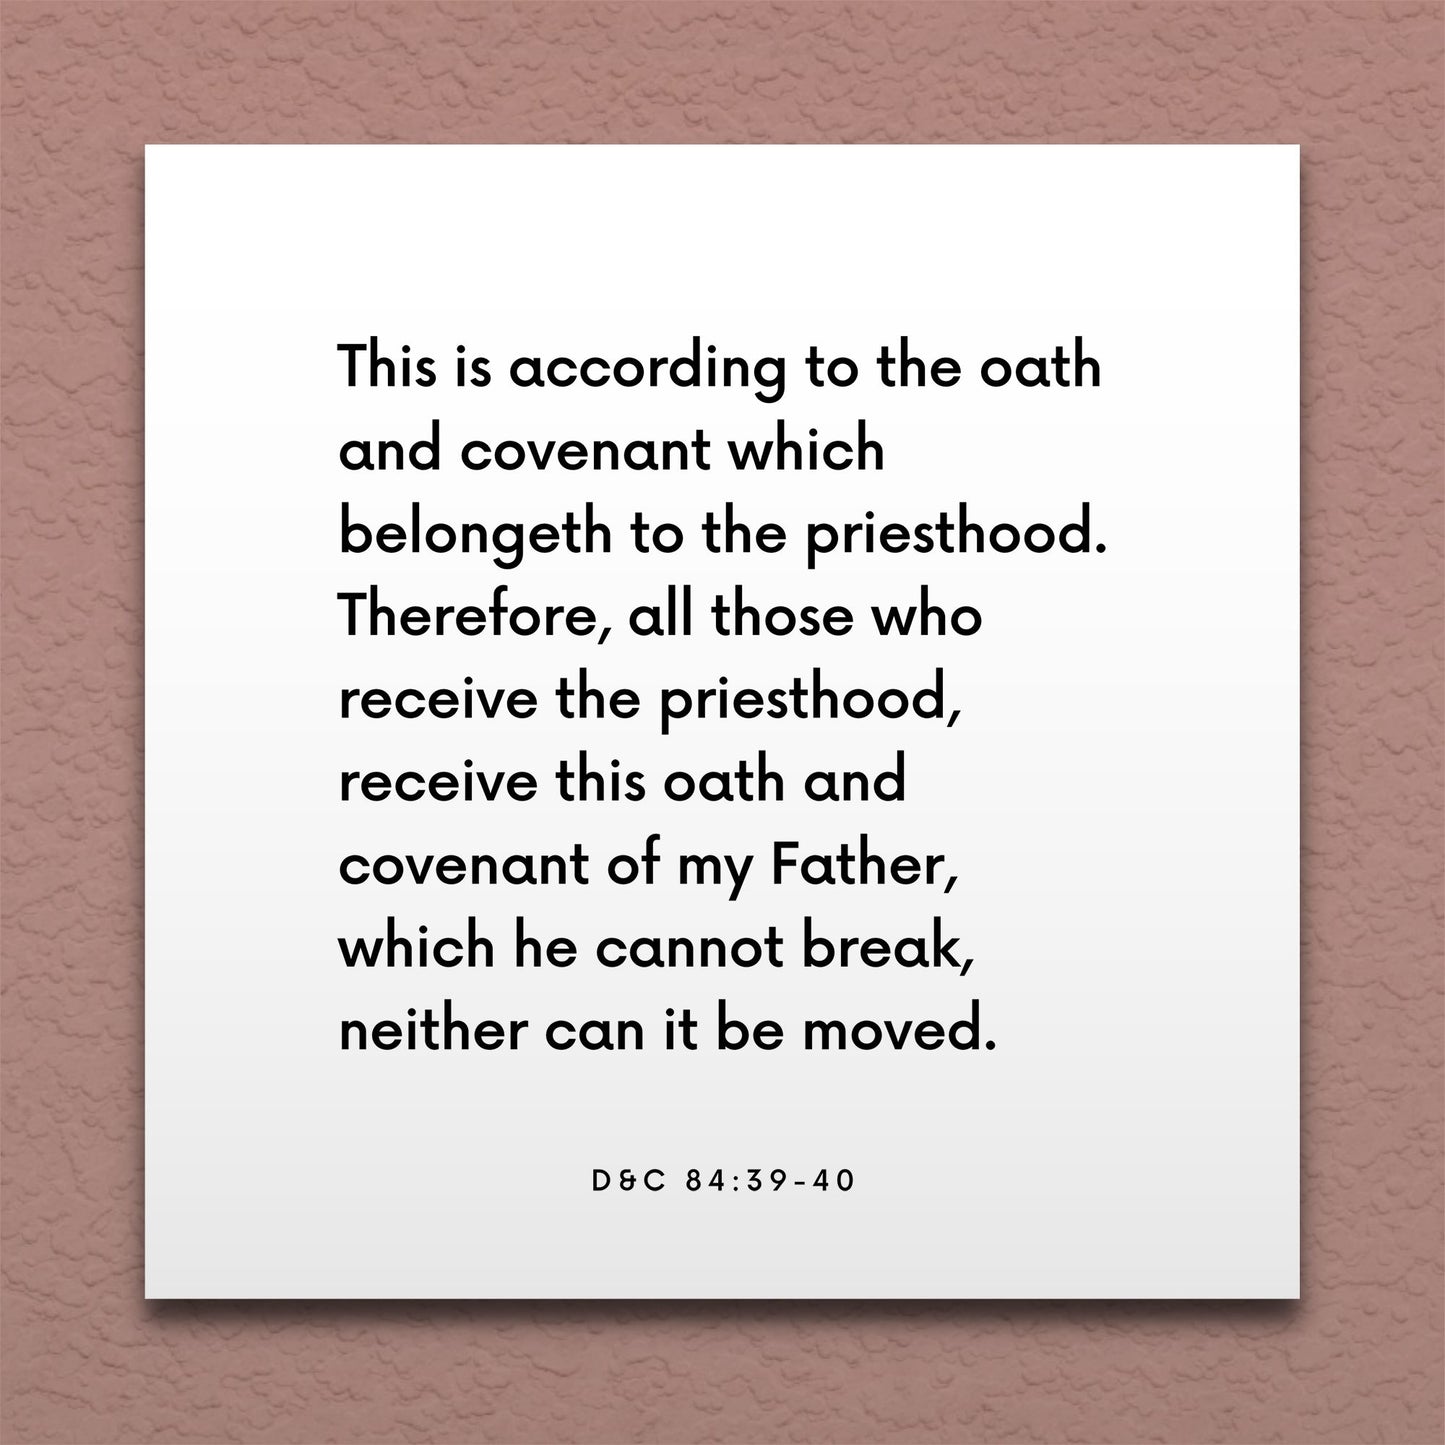 Wall-mounted scripture tile for D&C 84:39-40 - "This is according to the oath and covenant"